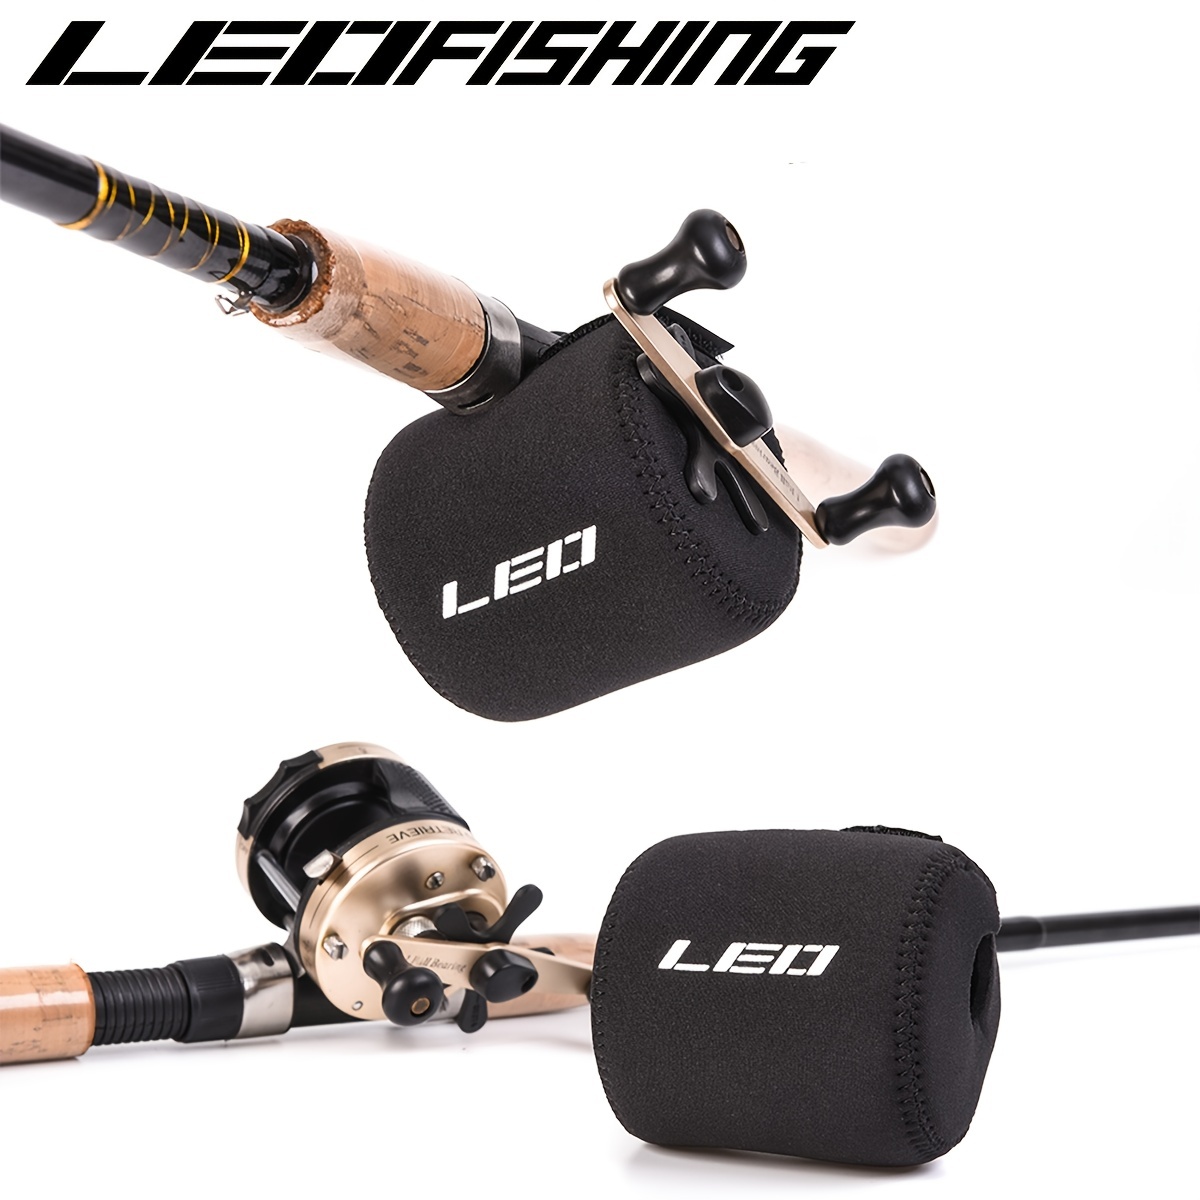 LEOFISHING Neoprene Baitcasting Reel Cover - Left/Right Handed Ambidextrous  - Black/Blue - Protects Reel from Damage and Corrosion